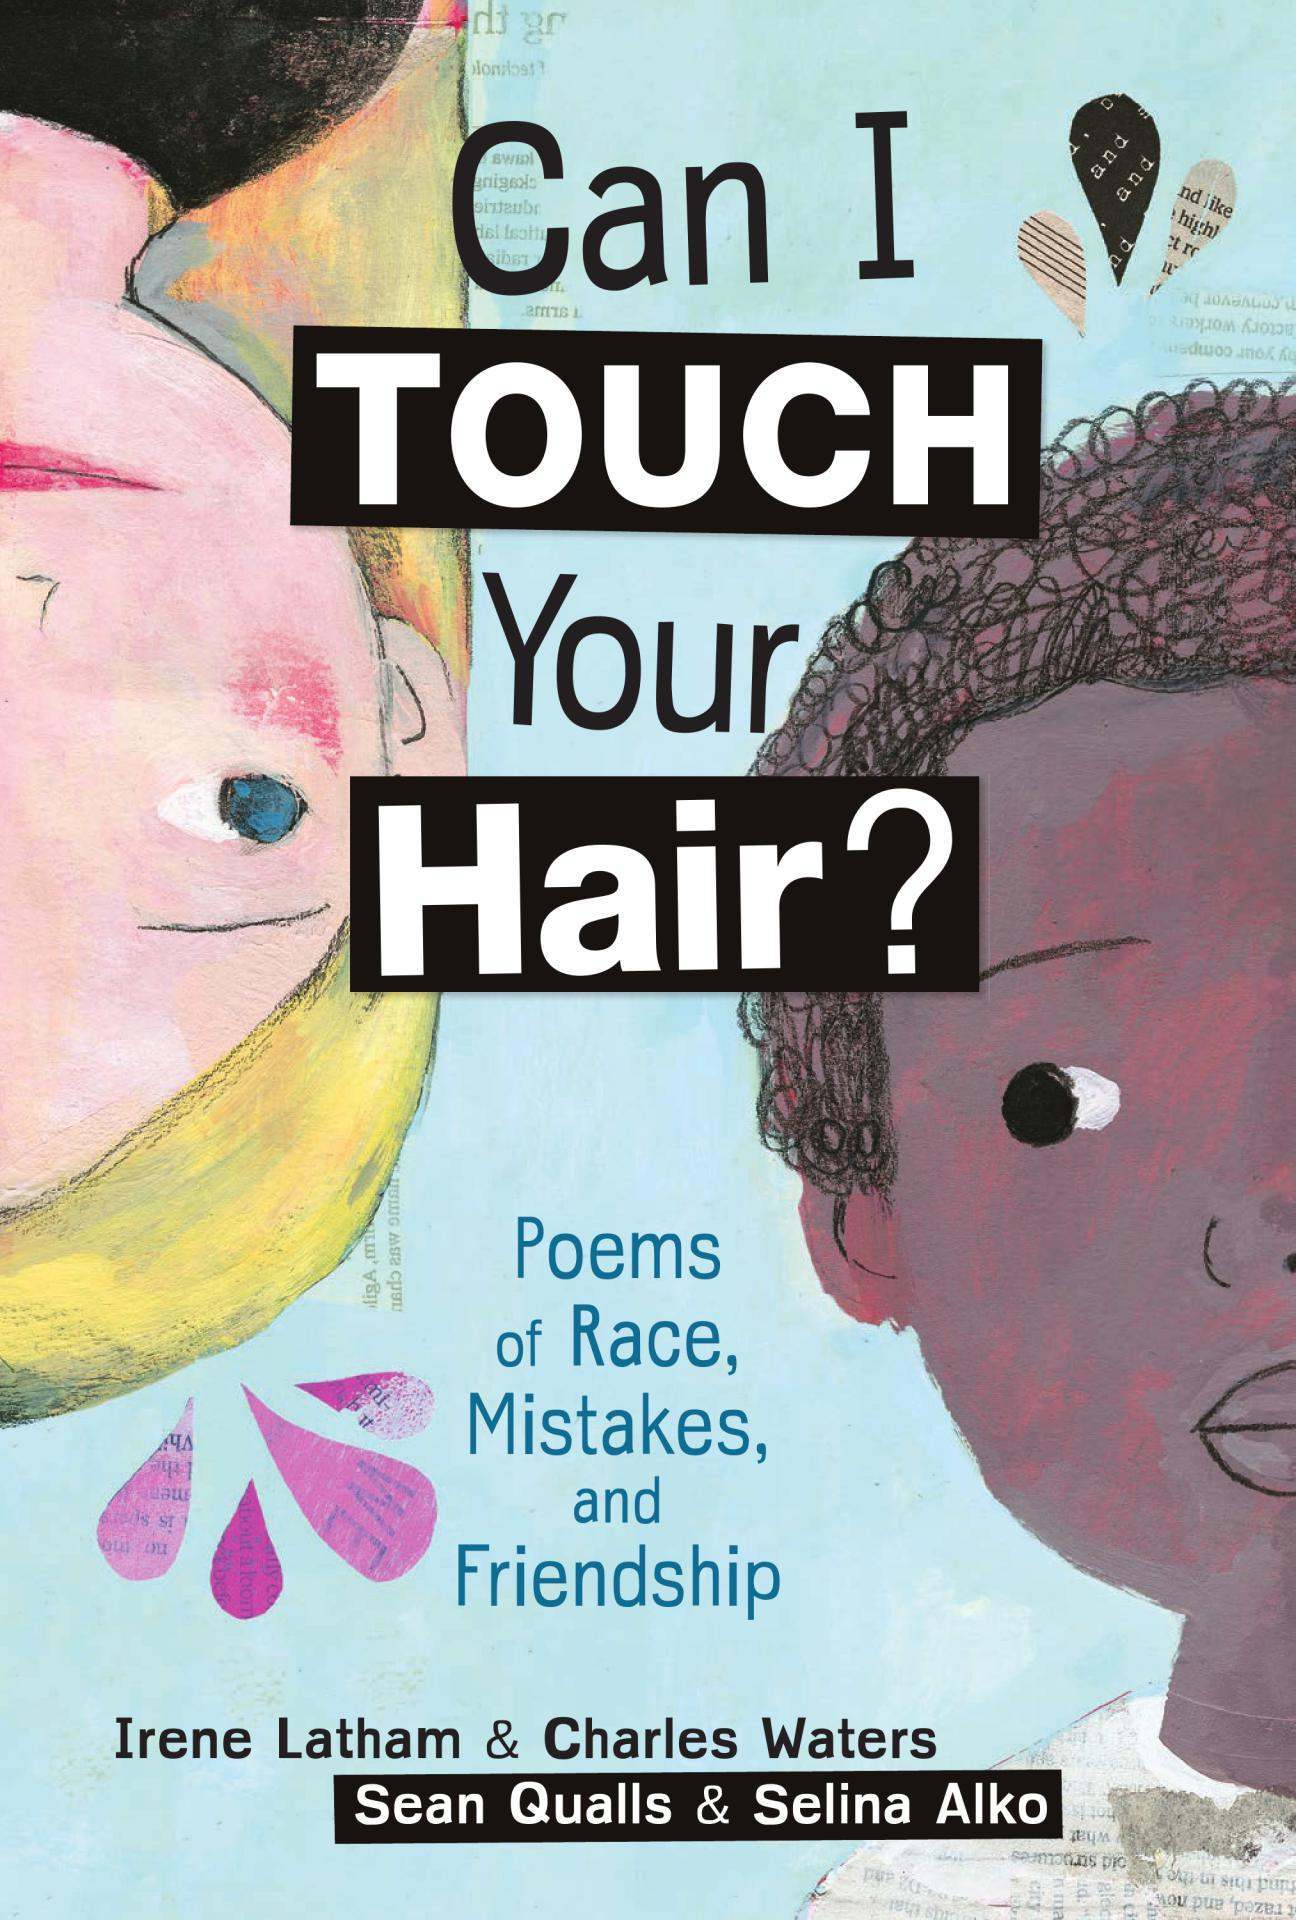 A list of new multicultural picture books in 2018 that should be added to your growing diverse bookshelves. These delightful books will help you have courageous conversations with children about race, friendship, and global citizenship.